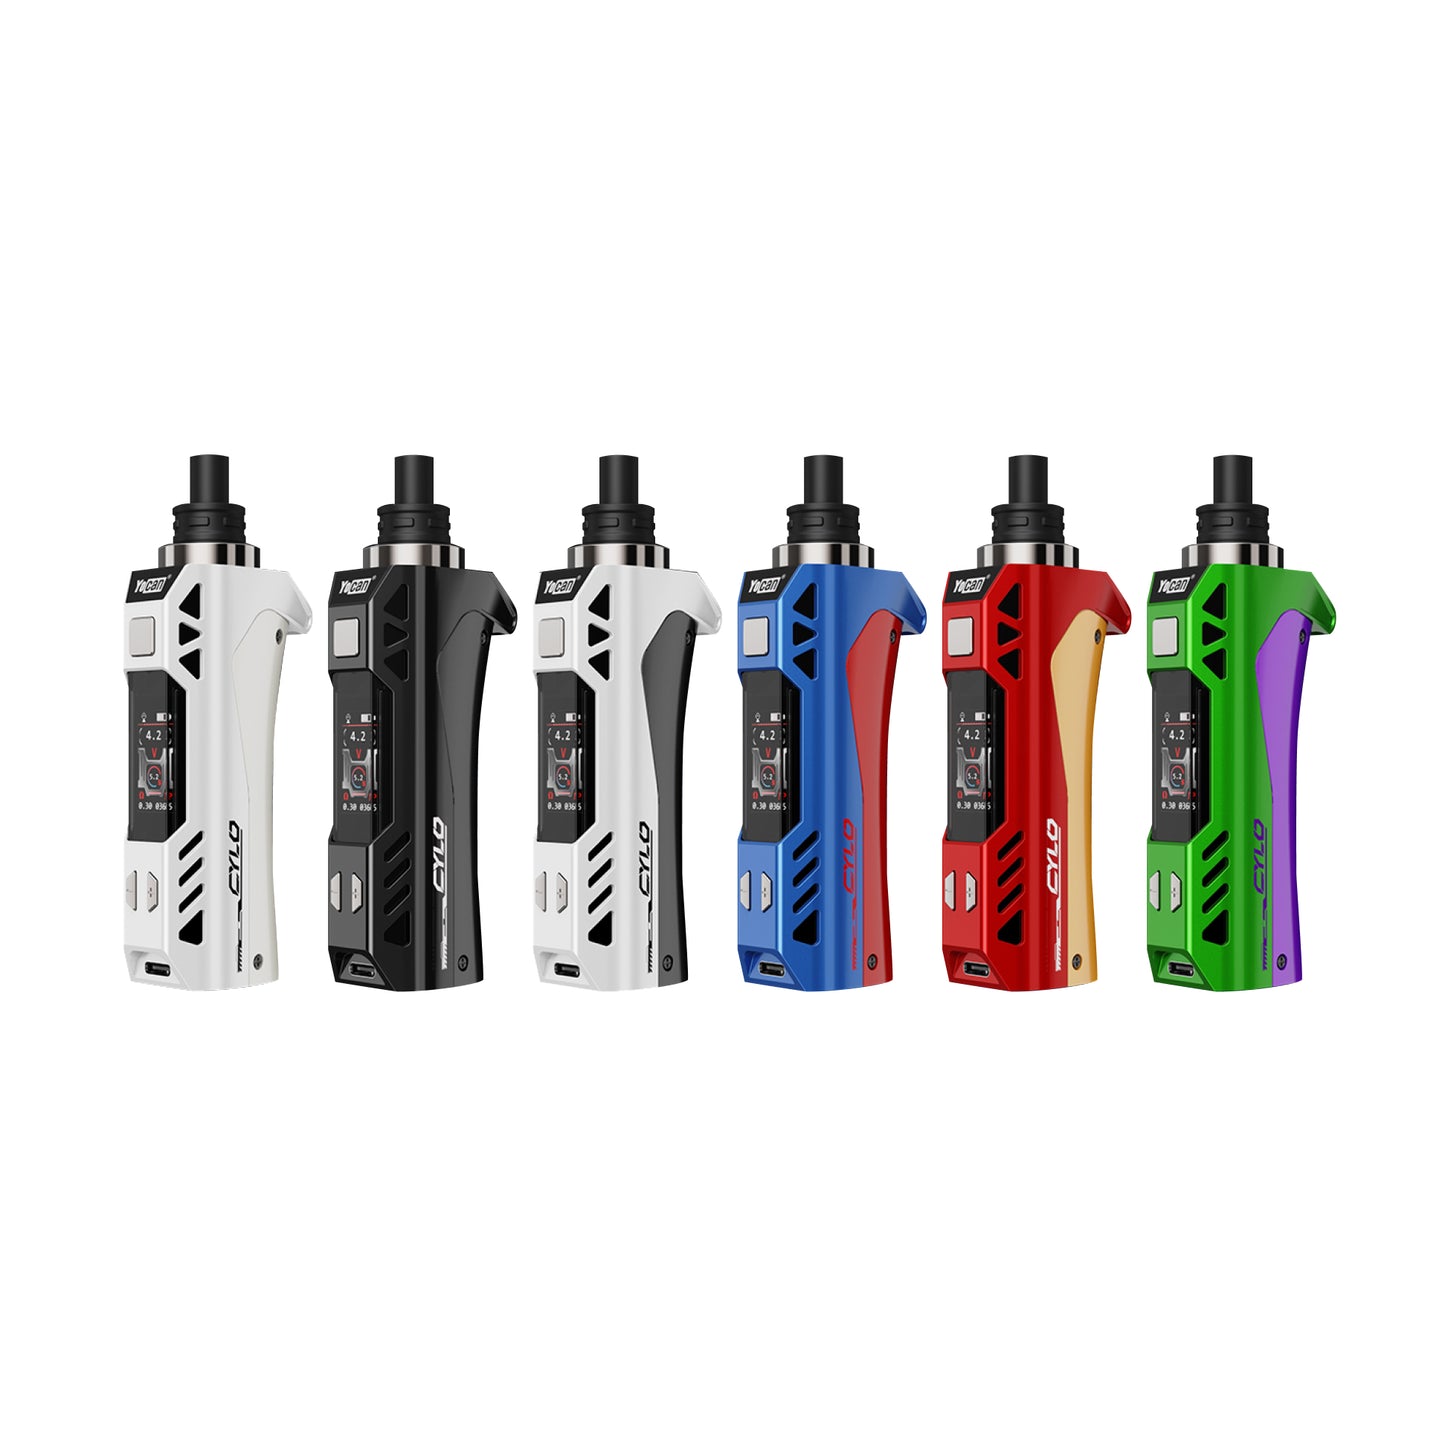 Yocan Cylo Vaporizer - All Colors